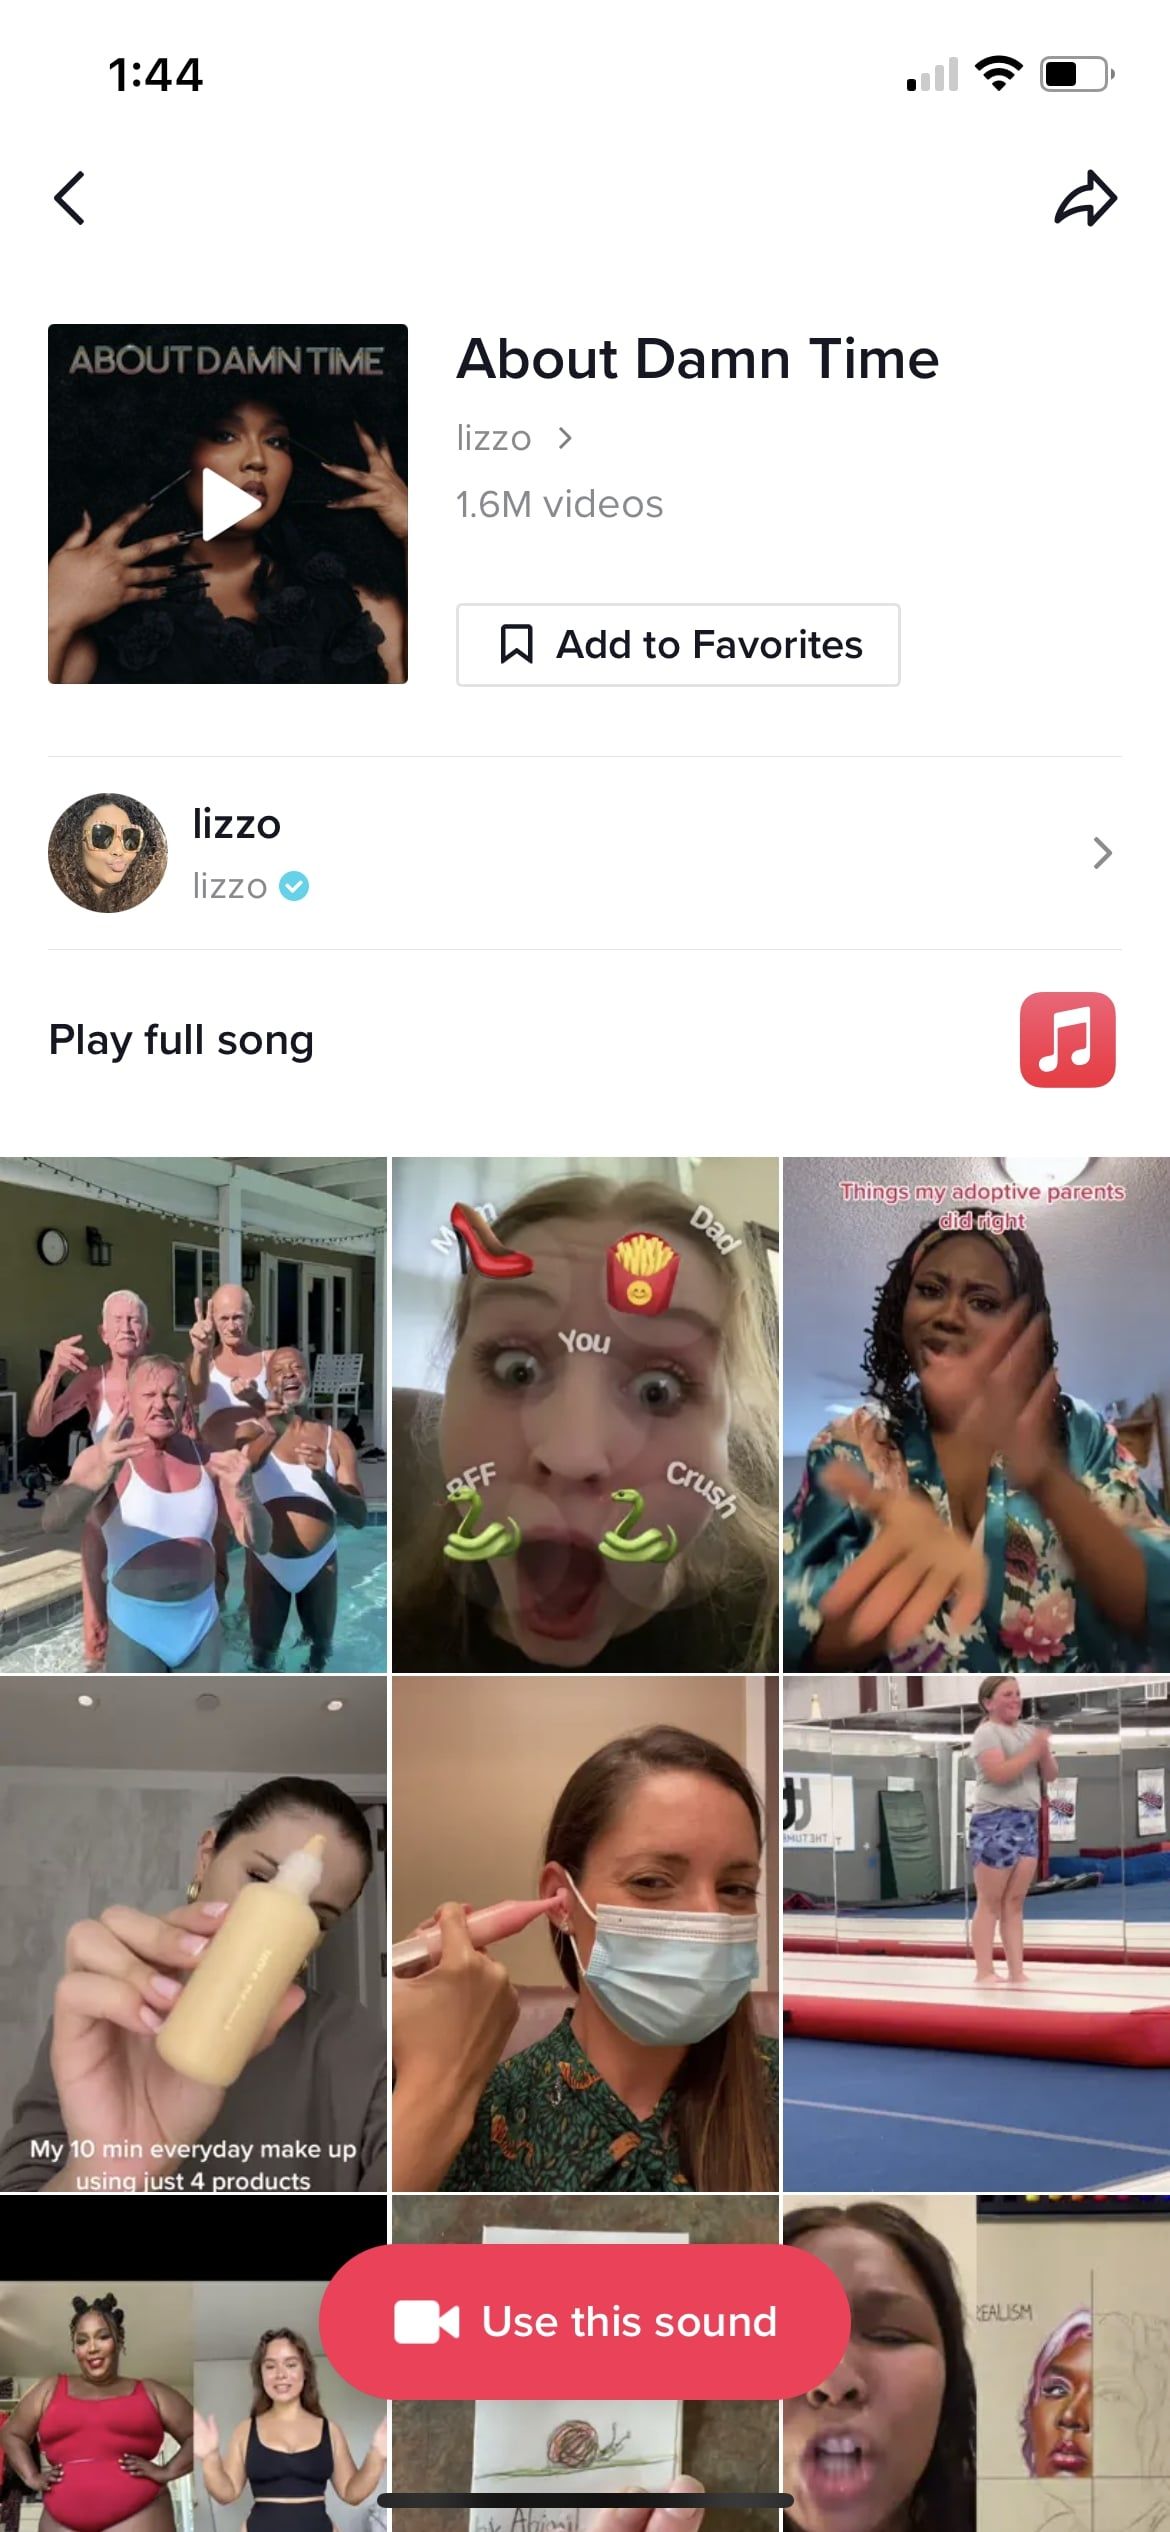 Screenshot of the "About Damn Time" sound page on TikTok